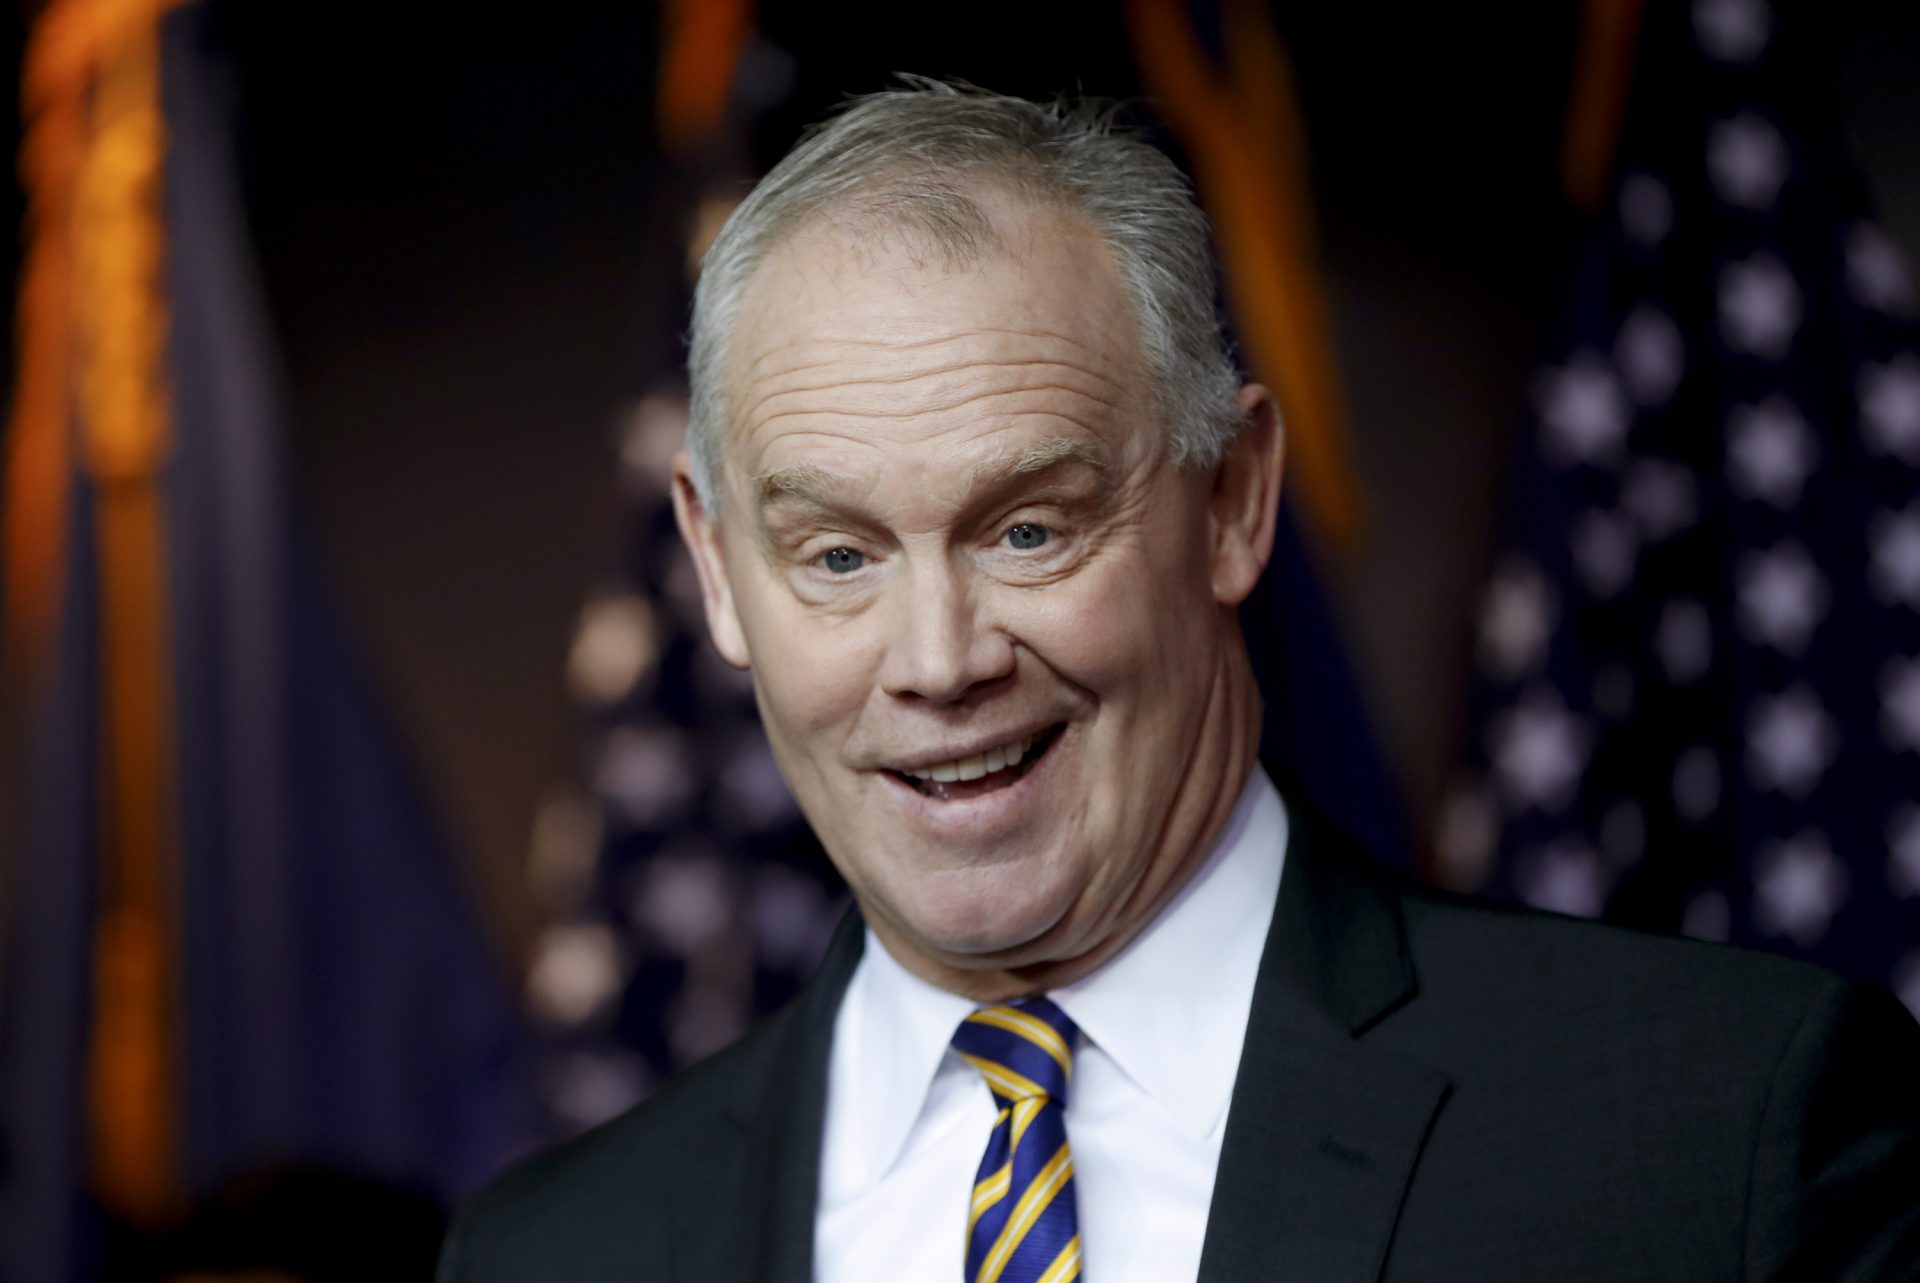 Pennsylvania Speaker of the House Mike Turzai announces at a news conference he will not run for another term as a Pennsylvania representative, Thursday, Jan. 23, 2020, in McCandless, Pa.